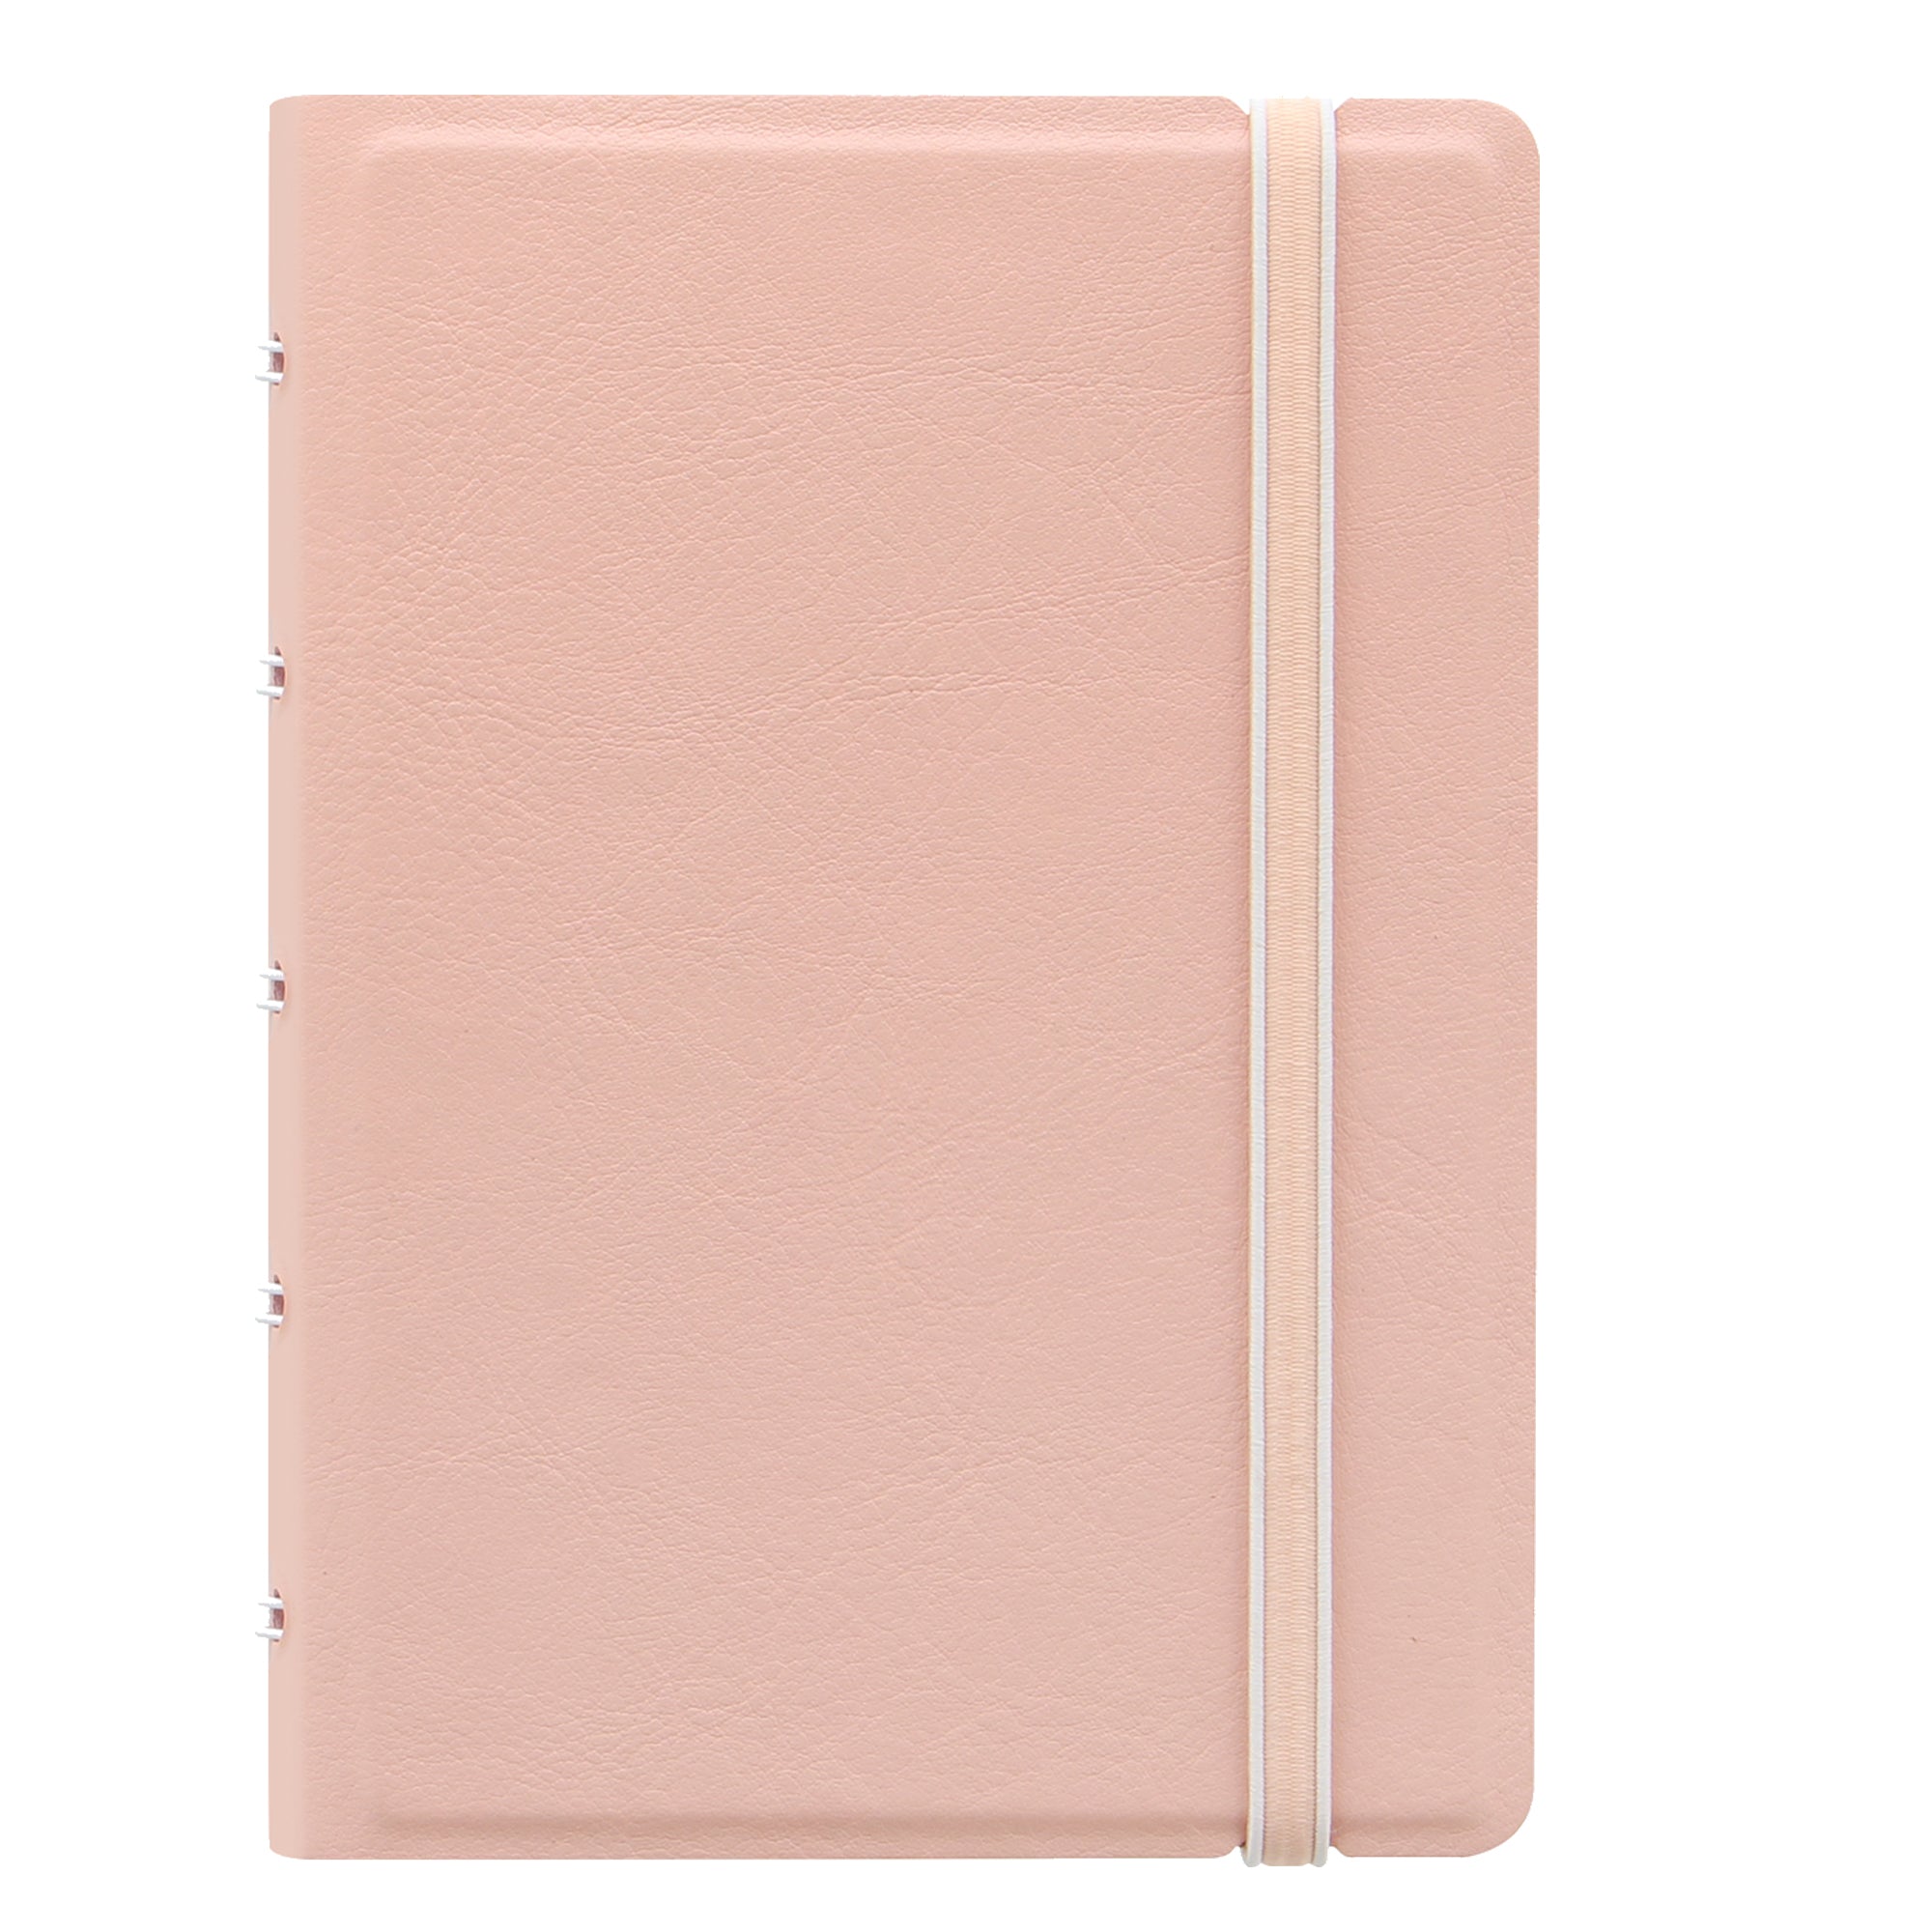 filofax-notebook-pocket-f-to-144x105mm-righe-56-pag-pesca-similpelle